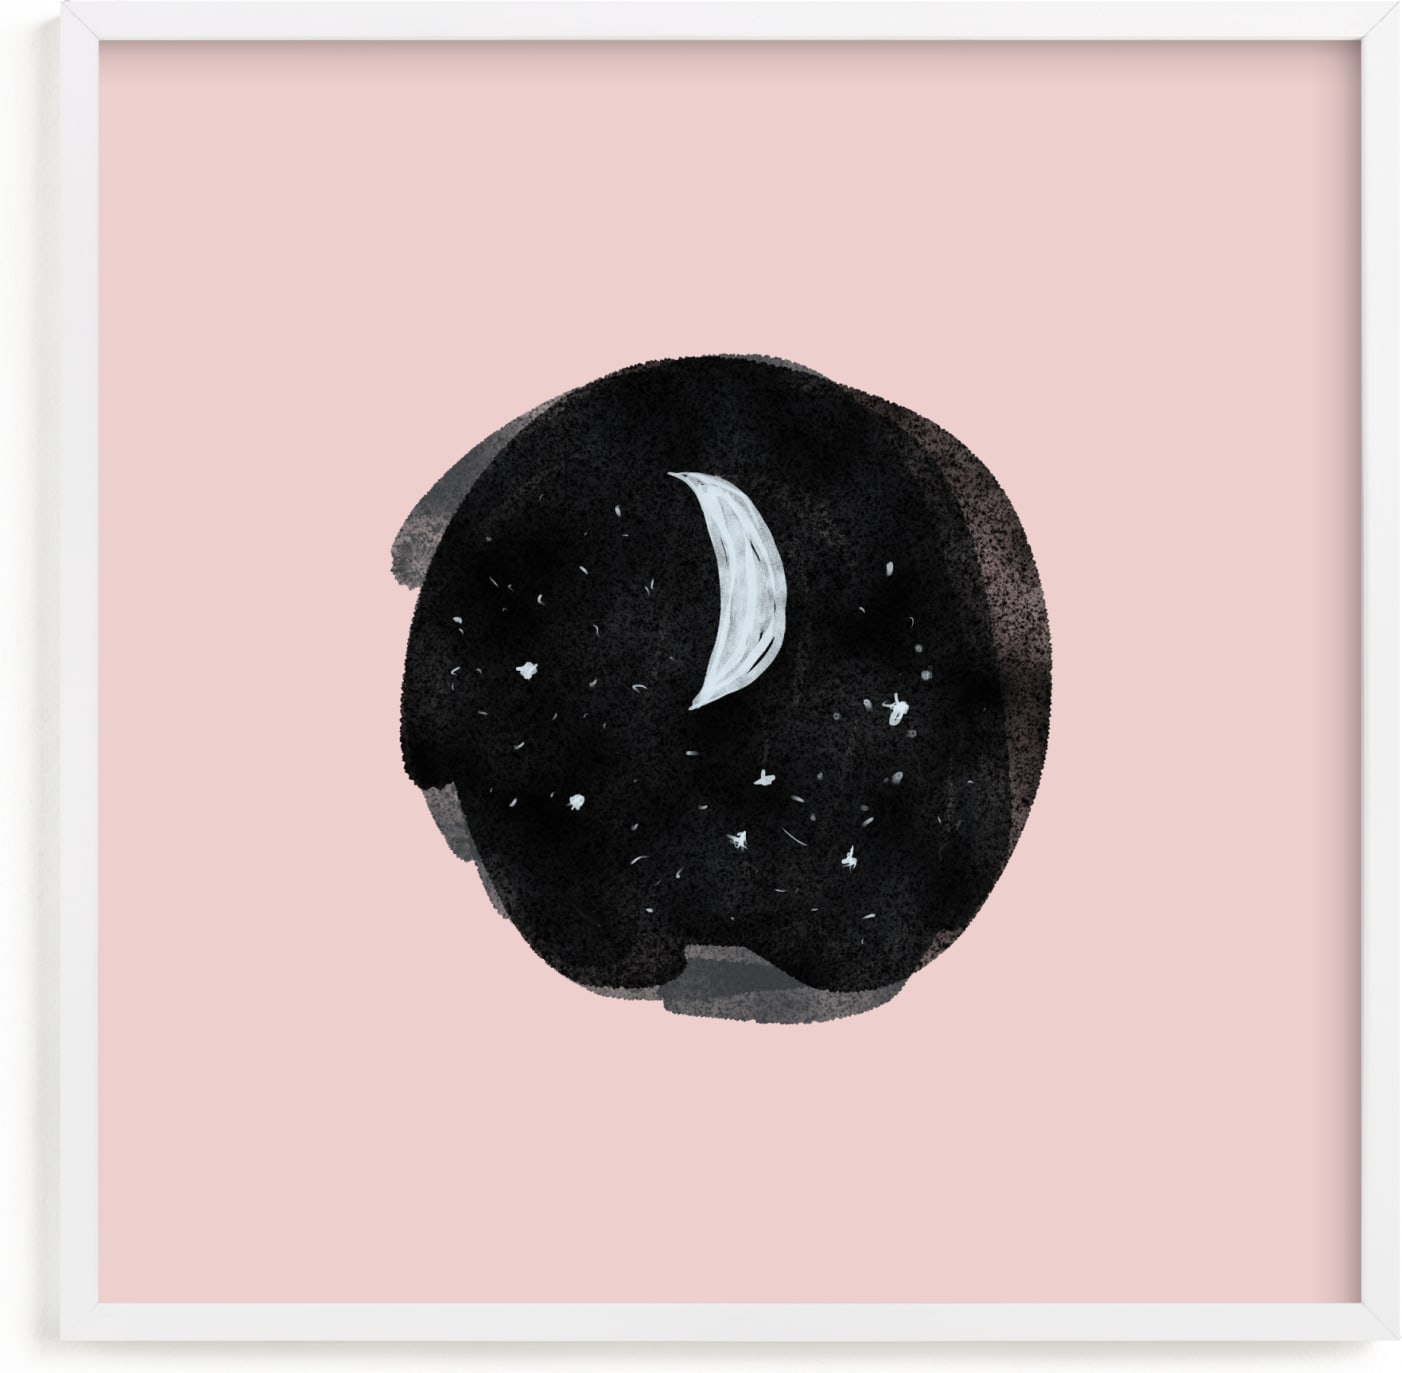 This is a pink nursery wall art by Nancy Noreth called Little Moon.